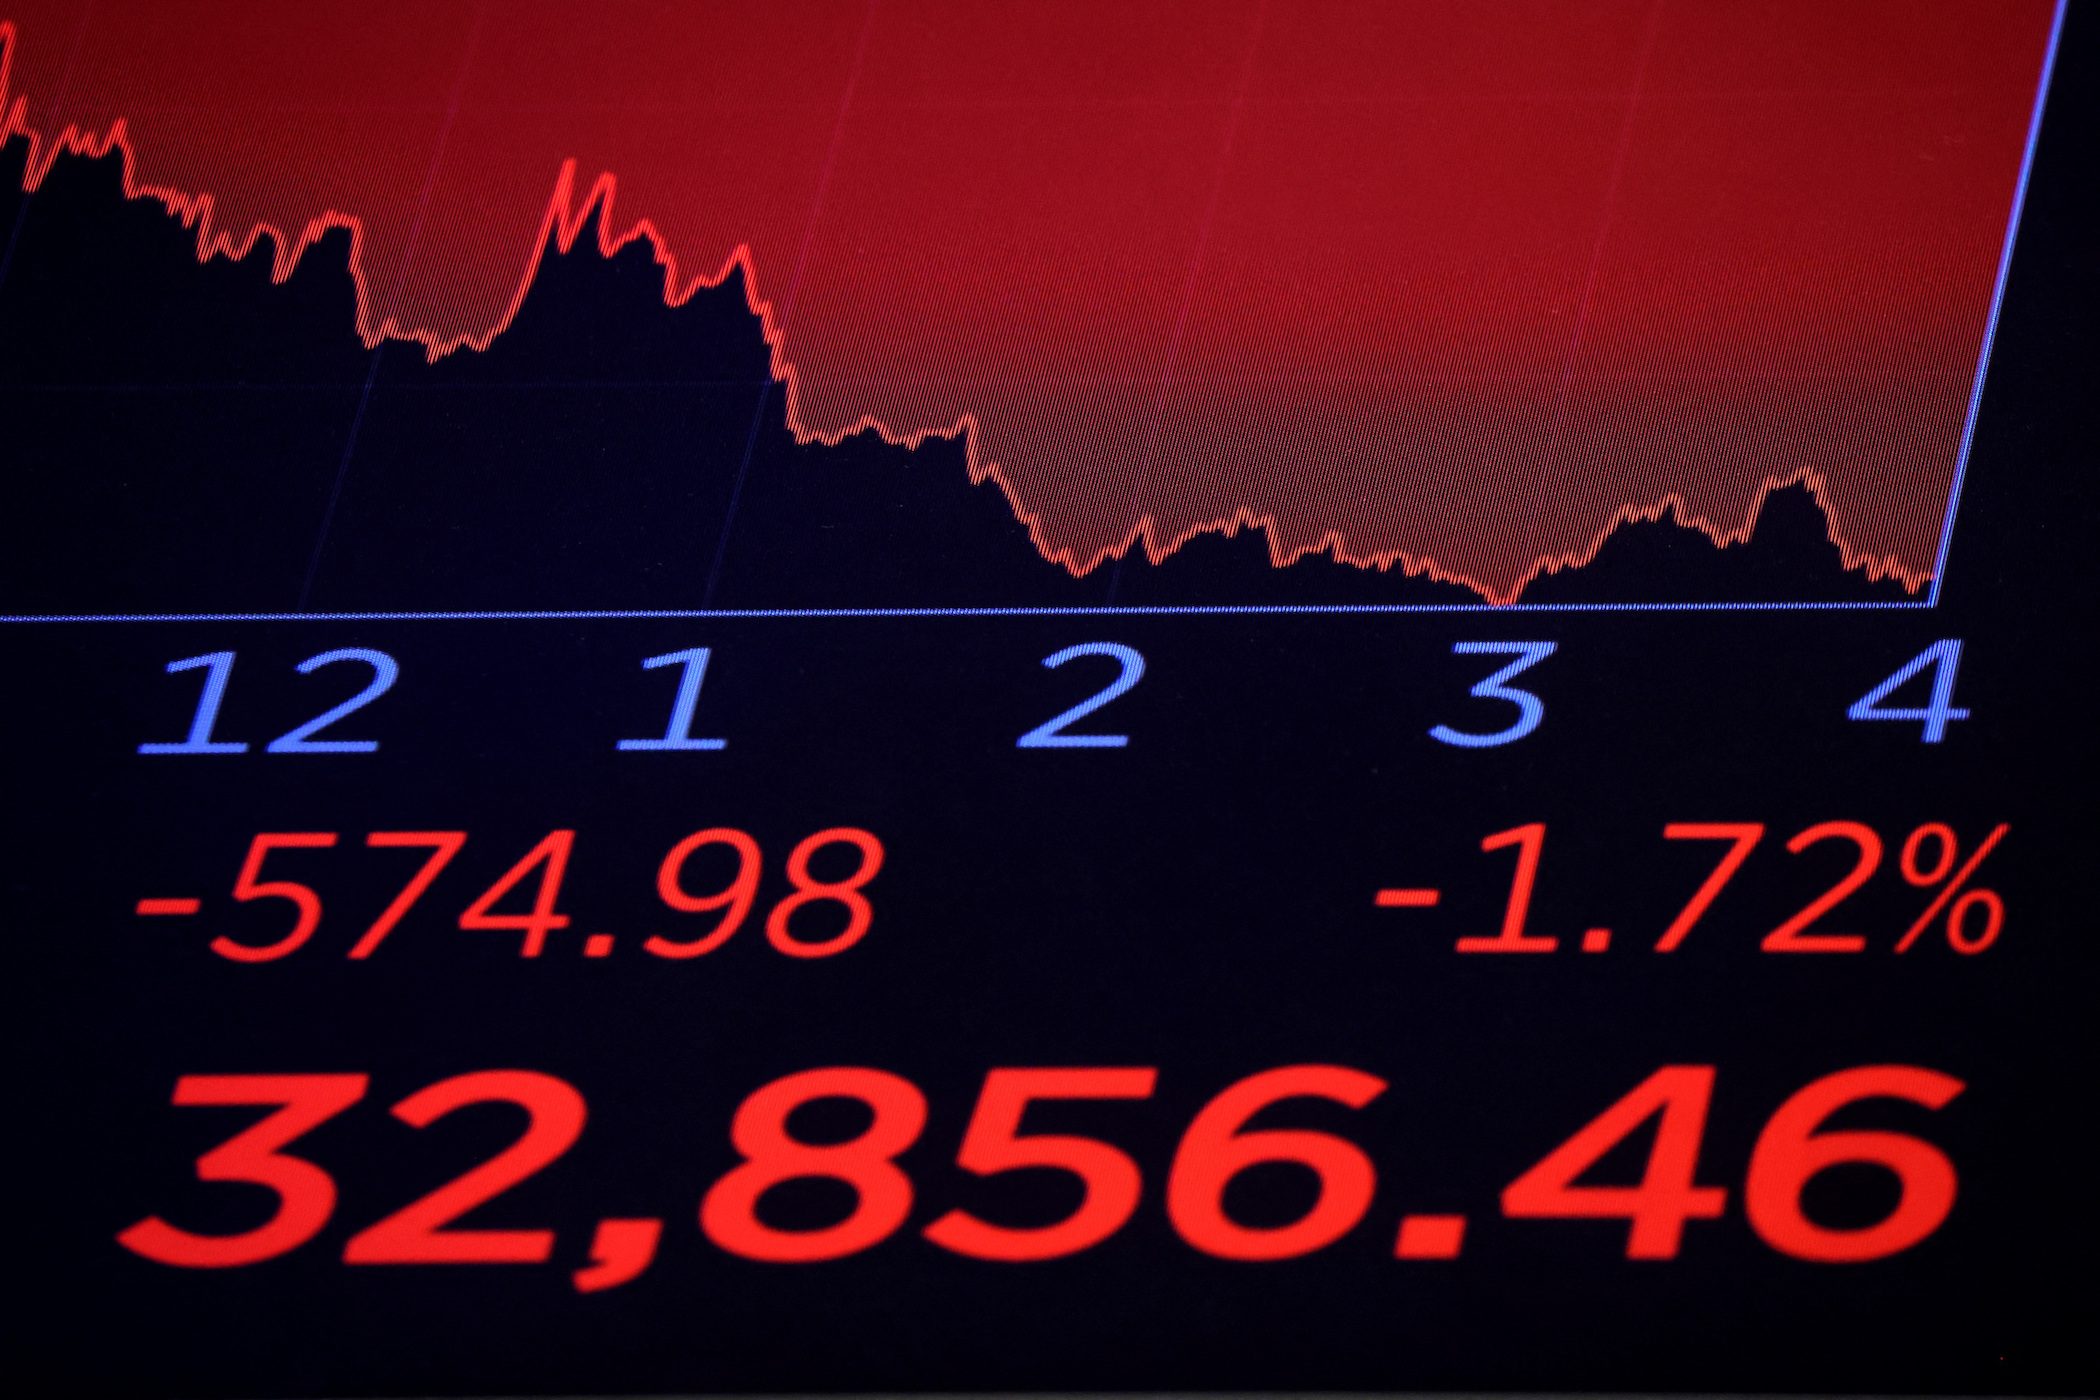 Wall Street ends sharply lower, Treasury yield inversion widens after Powell remarks